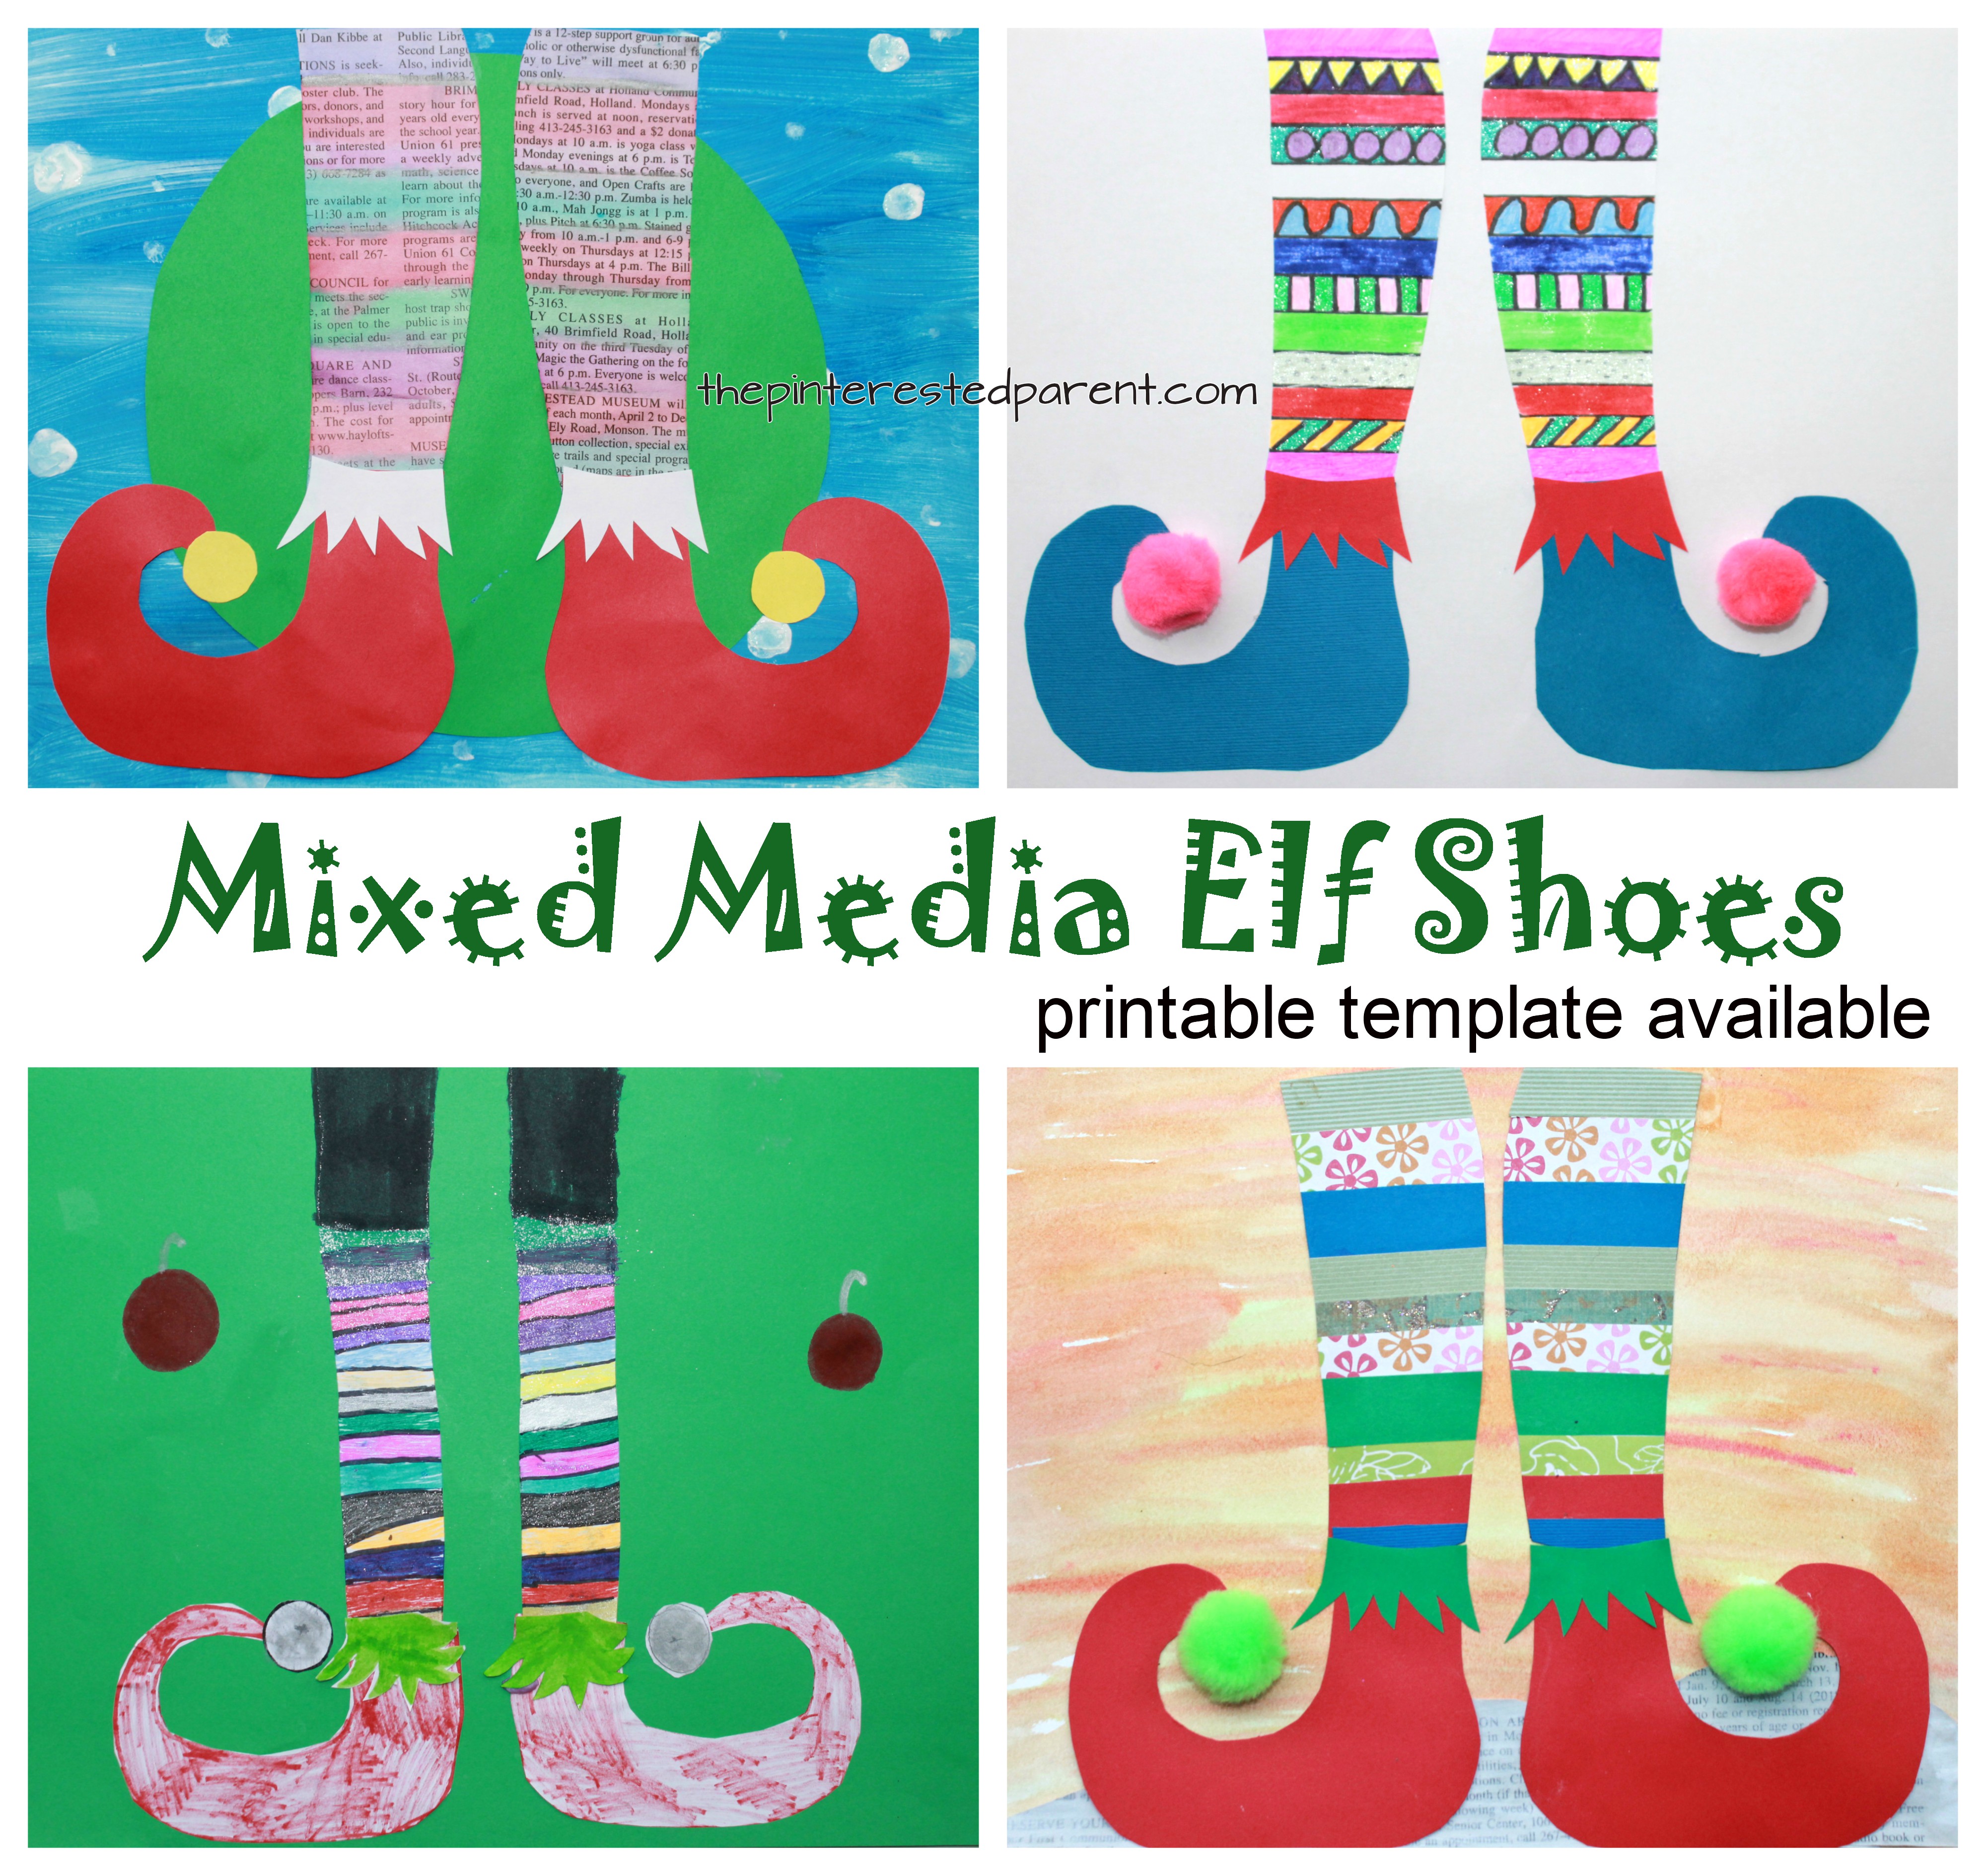 Mixed media elf shoes with printable template for your convenience. - Use paint, paper, newspaper, markers or watercolors to create these fun and colorful elf shoes. Winter and Christmas arts and crafts.